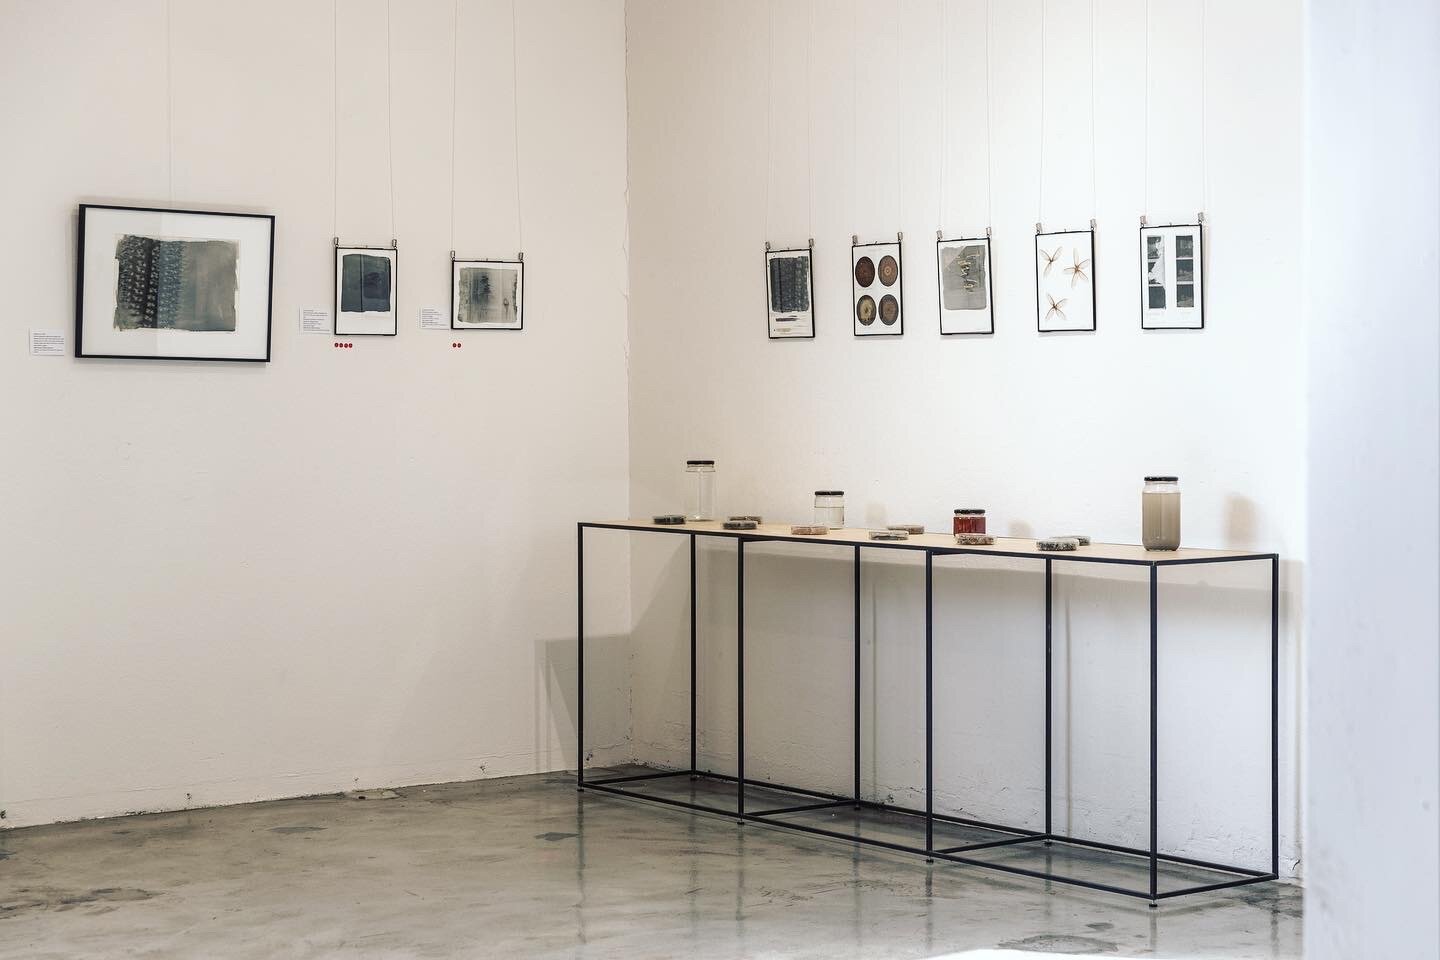  Install shot of liquid emulsion prints &amp; the process table/wall.  